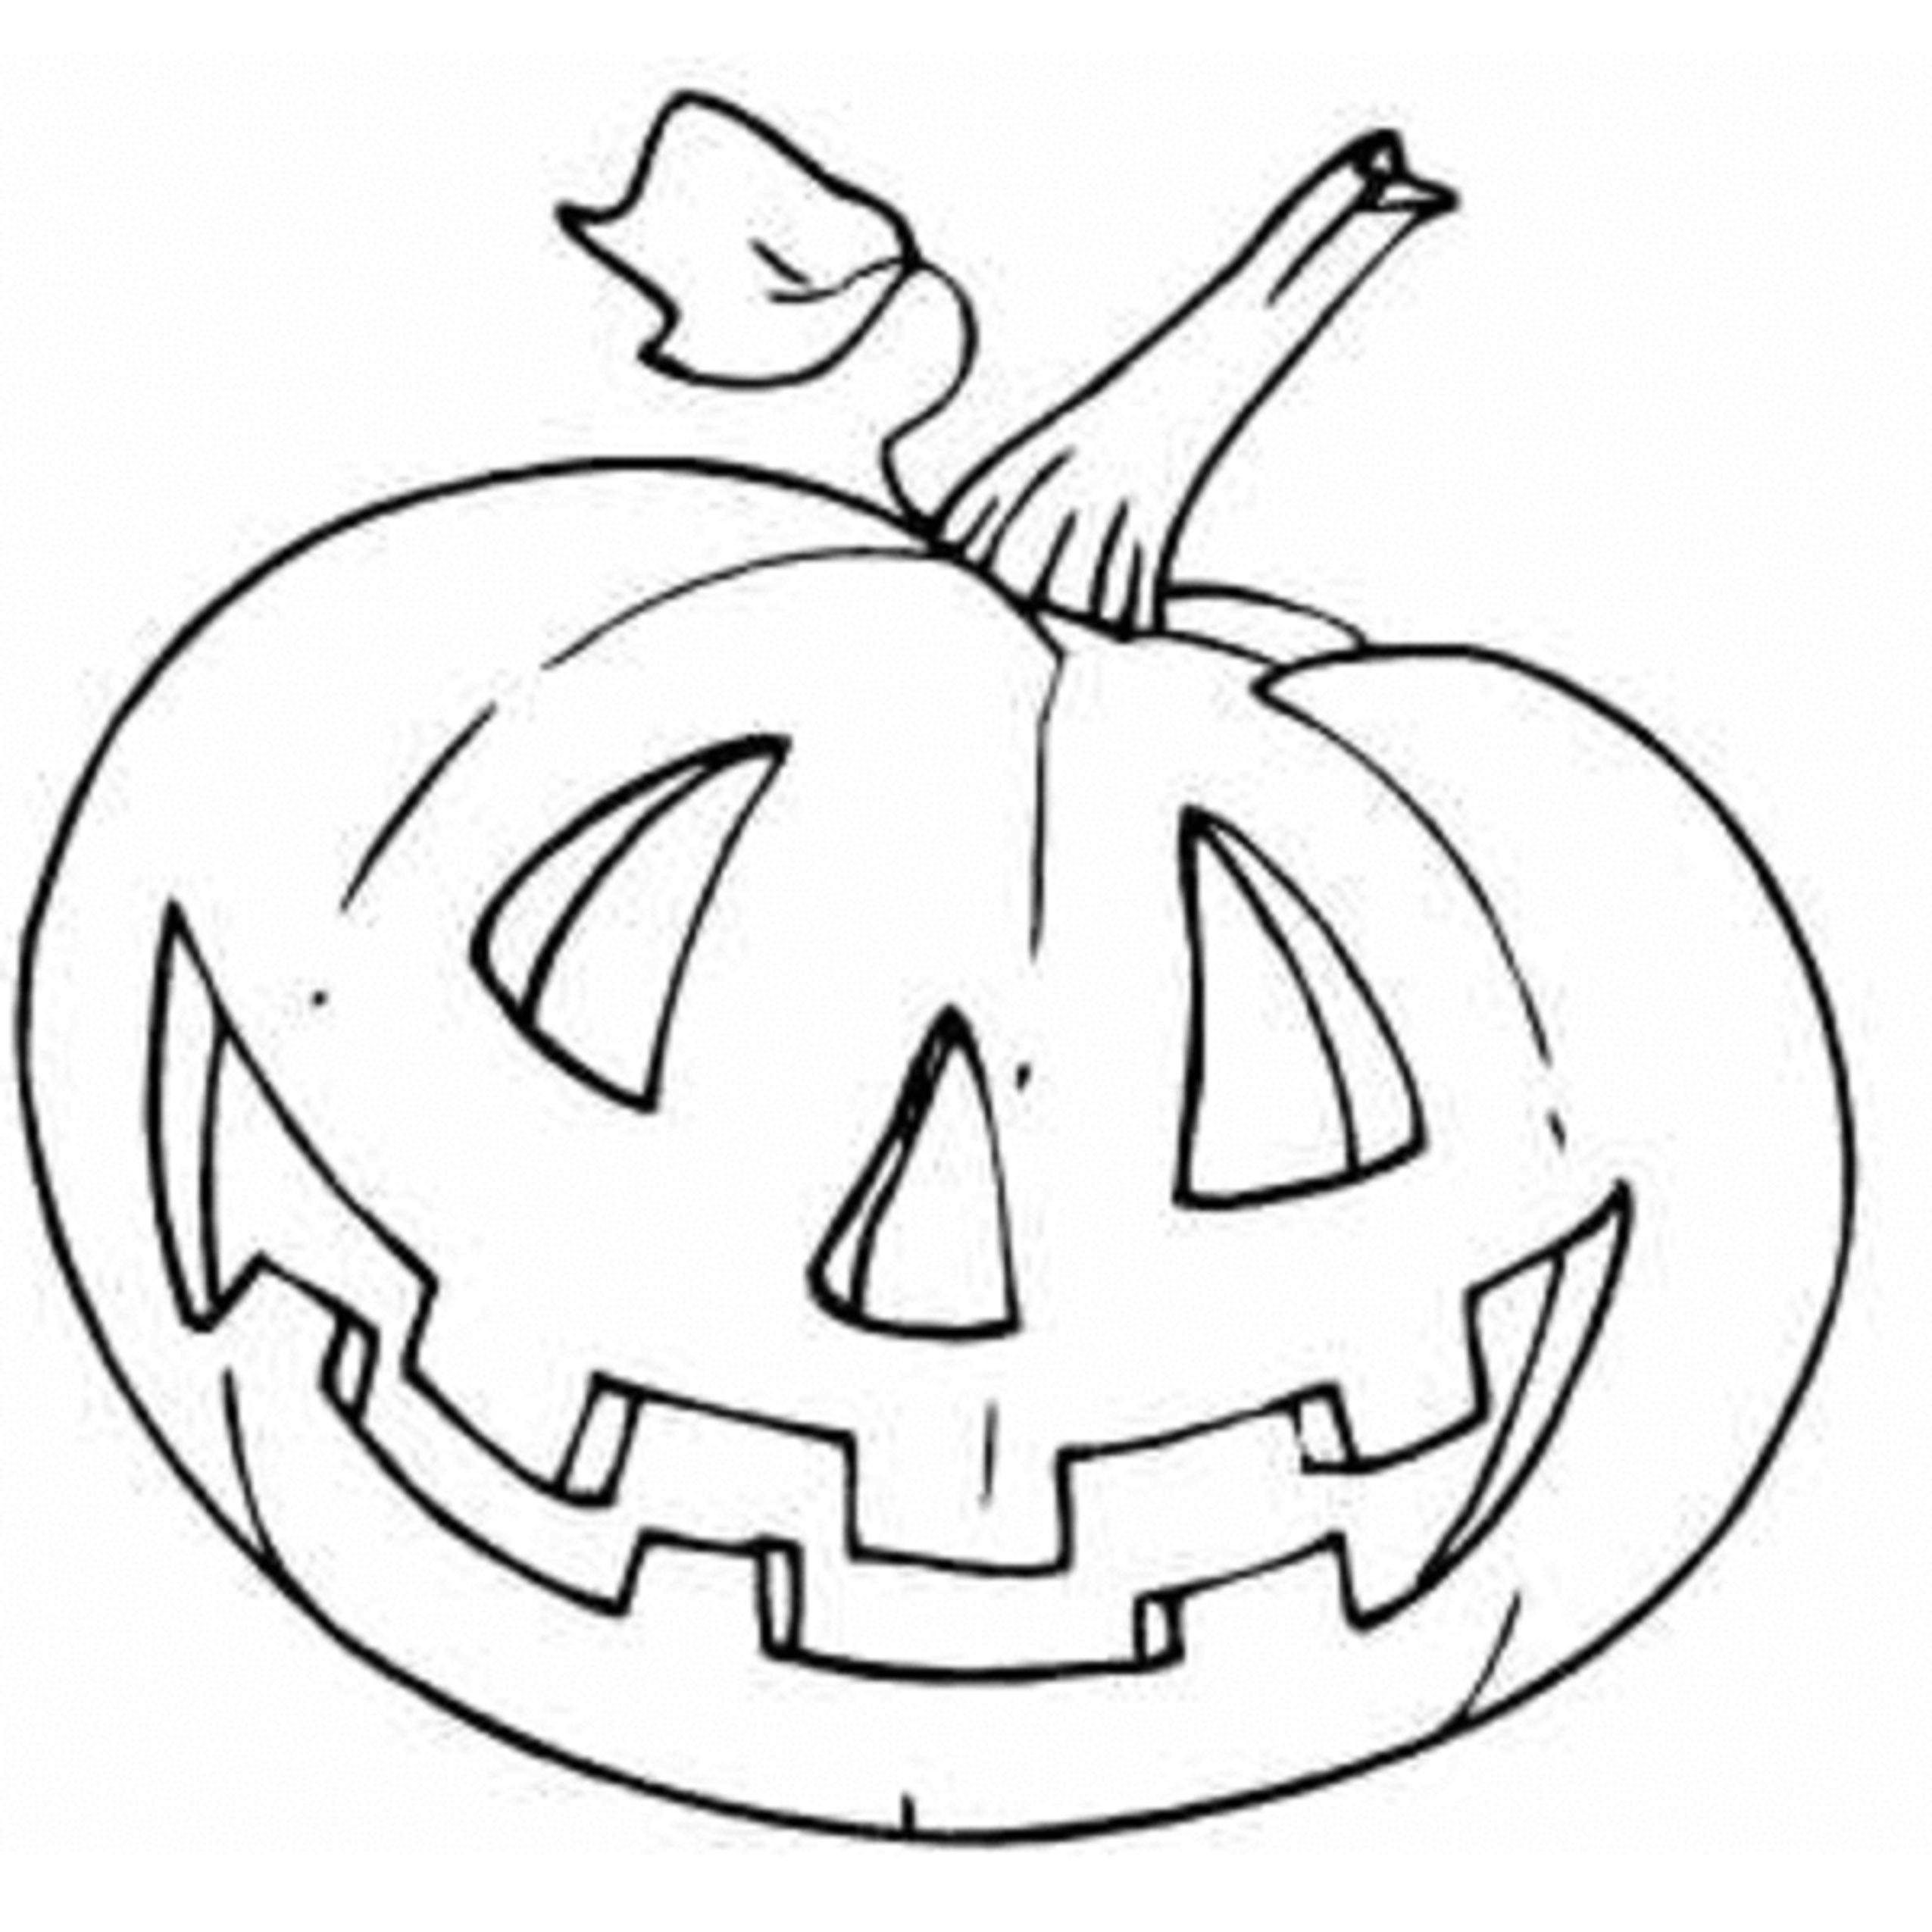 drawing-pumpkin-166959-objects-printable-coloring-pages